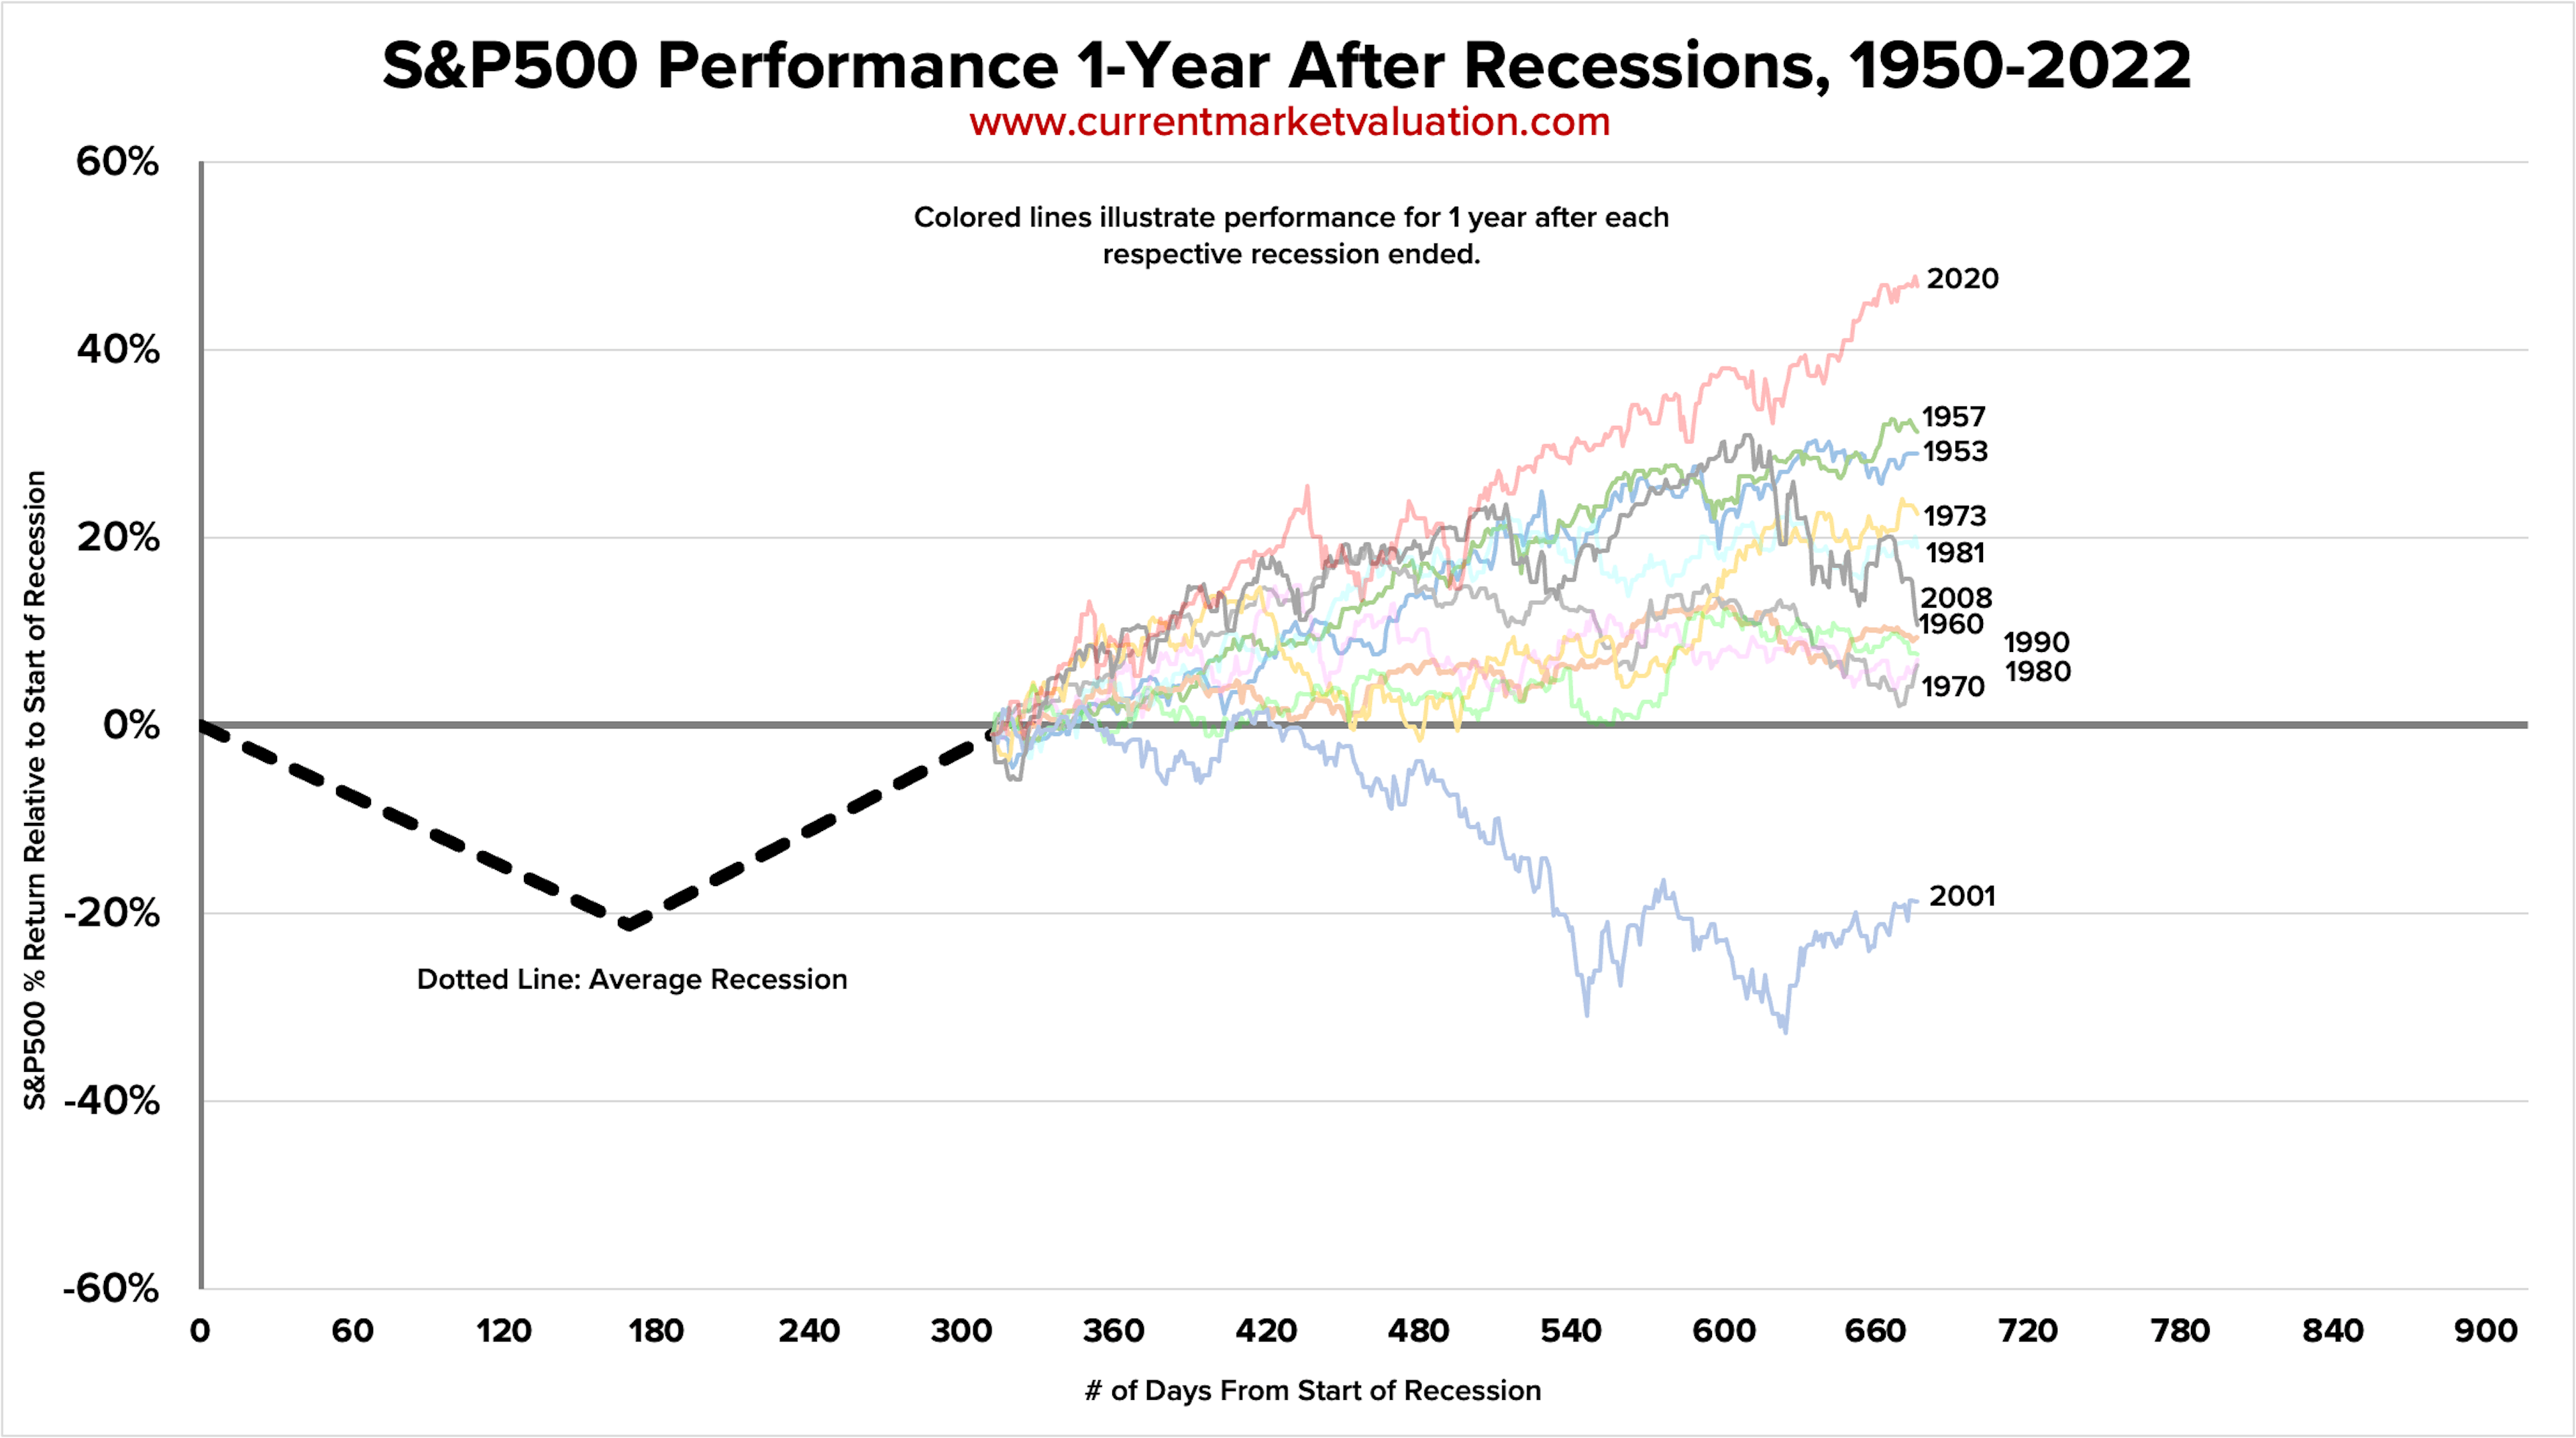 S&P500 Performance 1-year after recessions